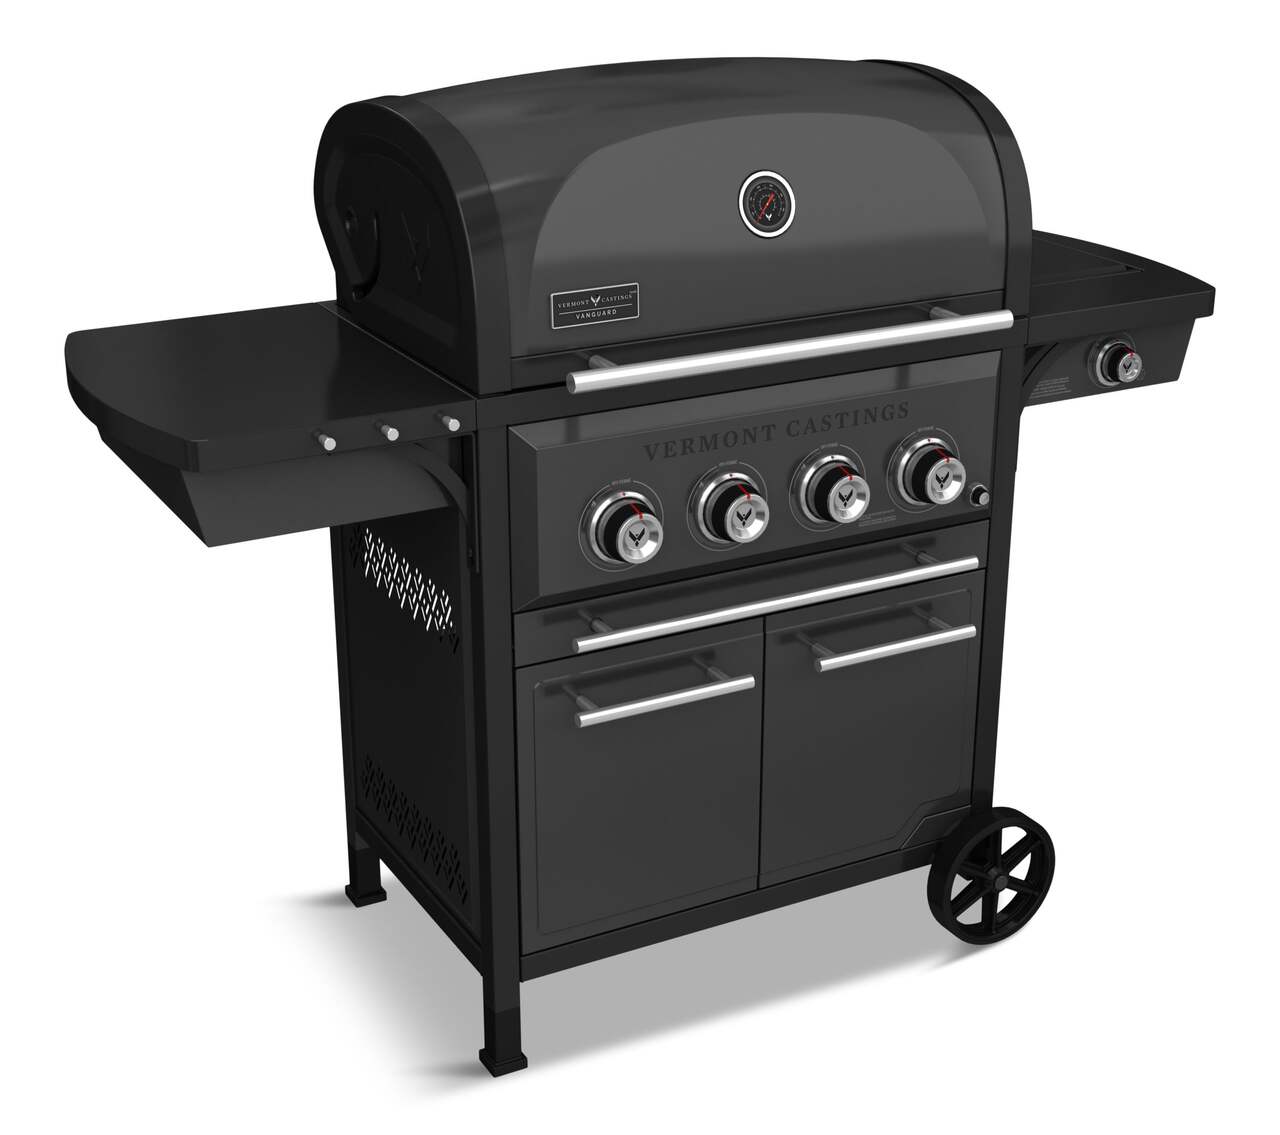 https://media-www.canadiantire.ca/product/seasonal-gardening/backyard-living/outdoor-cooking/0853156/vermont-castings-4b-convertible-propane-bbq-486d9a88-51f1-485f-b4cf-49cfb0159fea-jpgrendition.jpg?imdensity=1&imwidth=640&impolicy=mZoom